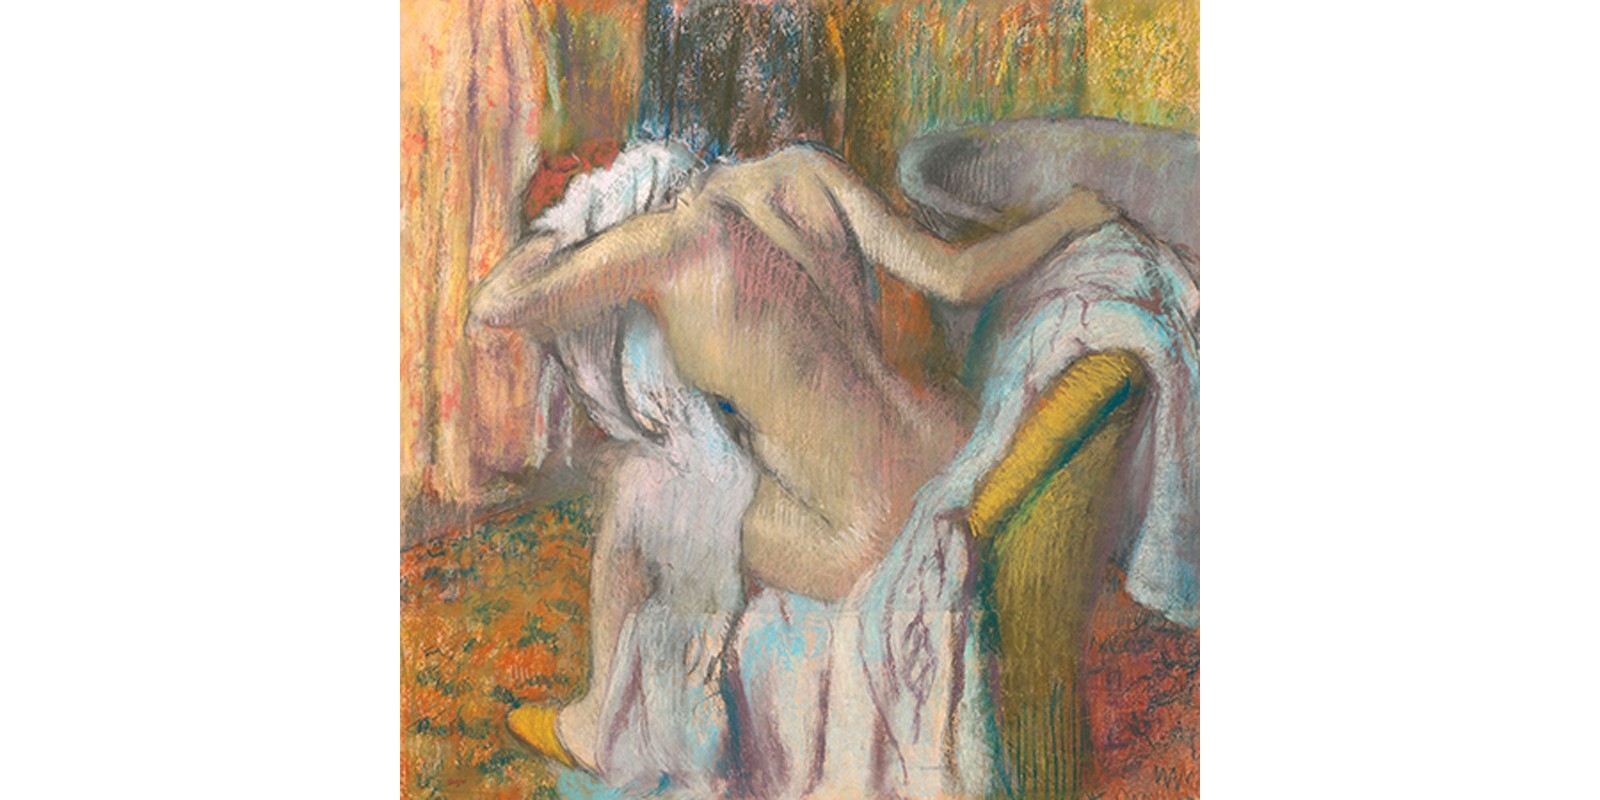 Degas Edgar Germain Hilaire - After the Bath, Woman Drying Herself